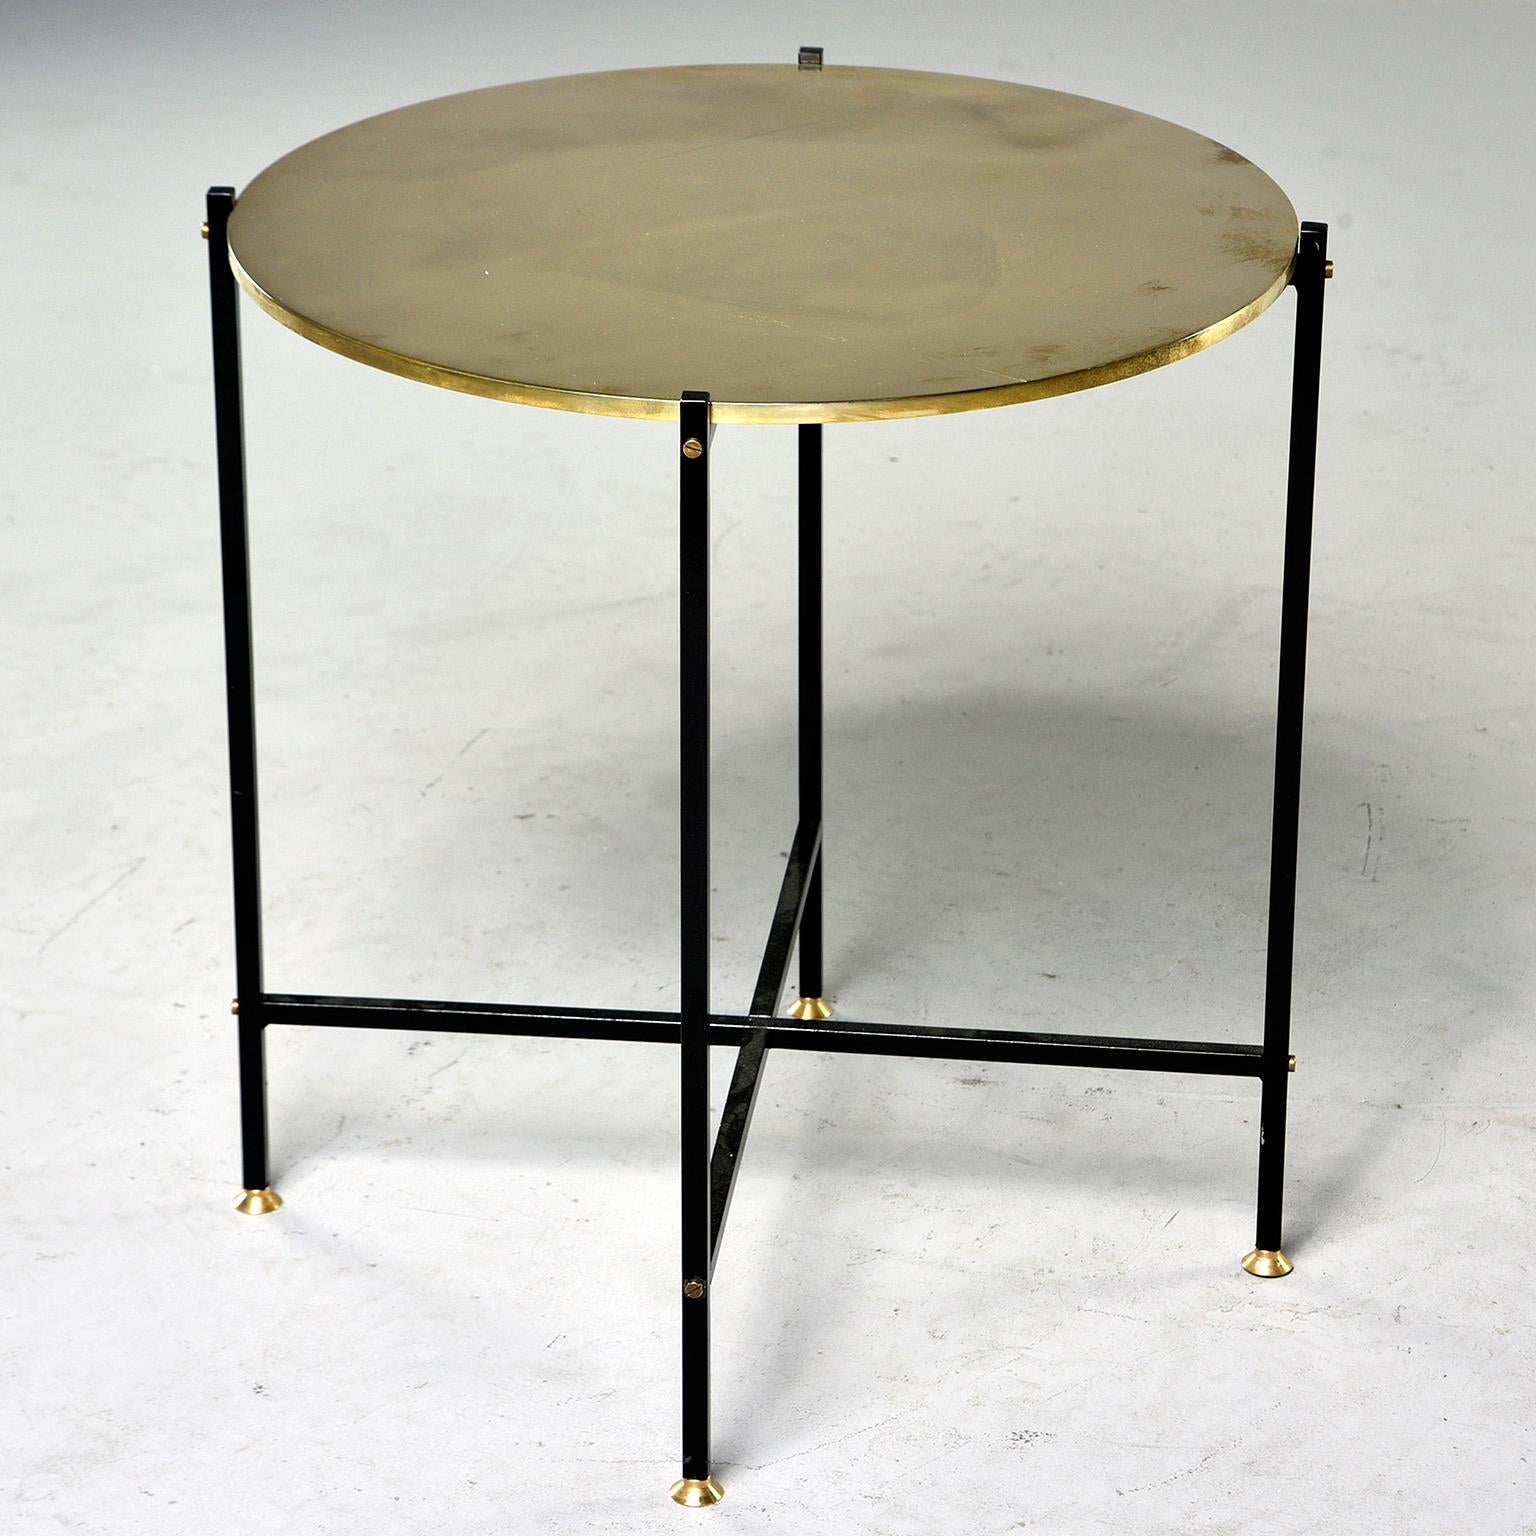 Italian Round Brass Top Side Table with Slender Black Iron Base